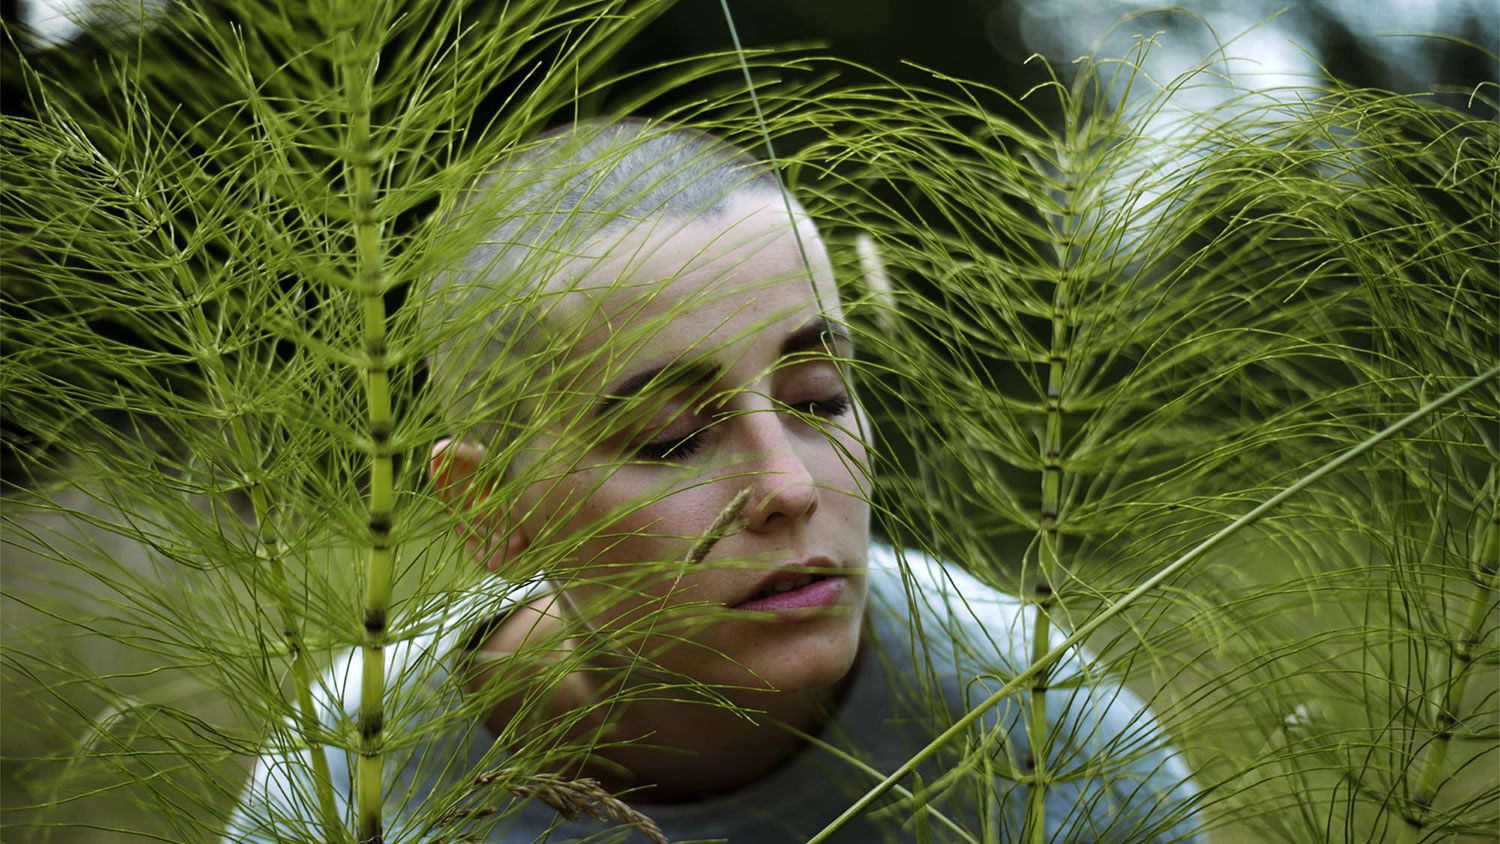 bald headed girl ,and green leaves